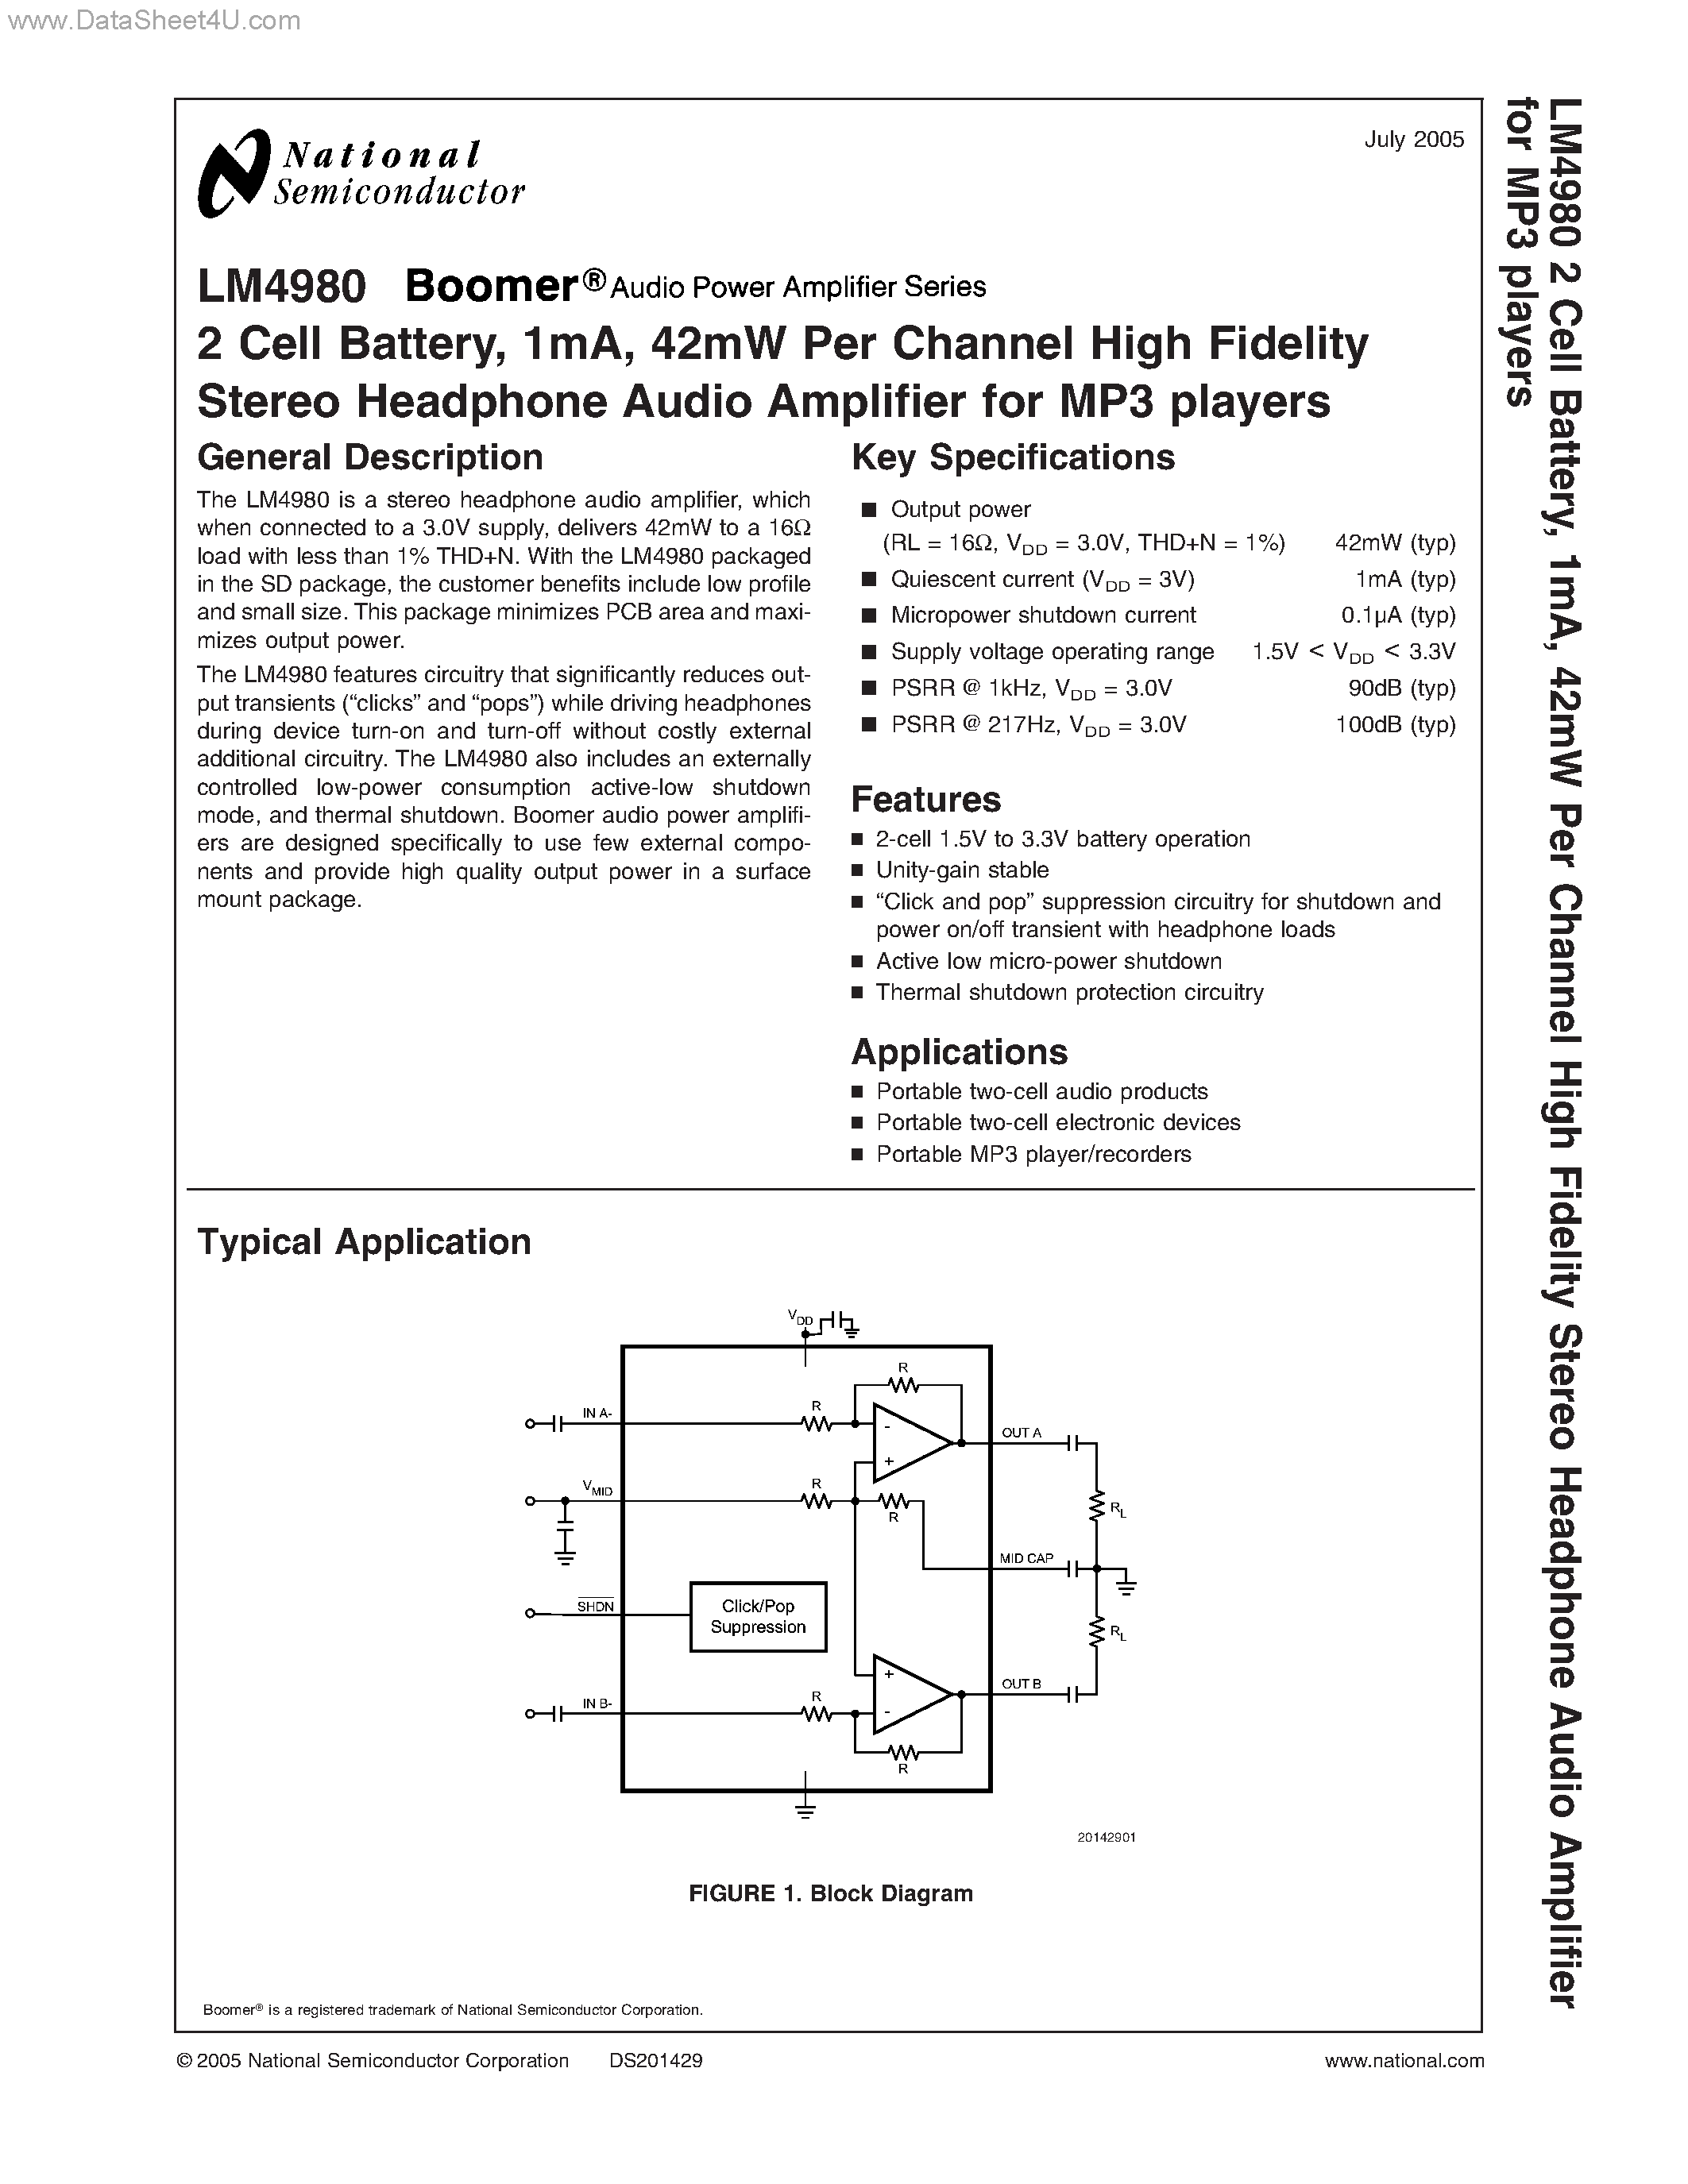 Datasheet LM4980 - High Fidelity Stereo Headphone Audio Amplifier page 1